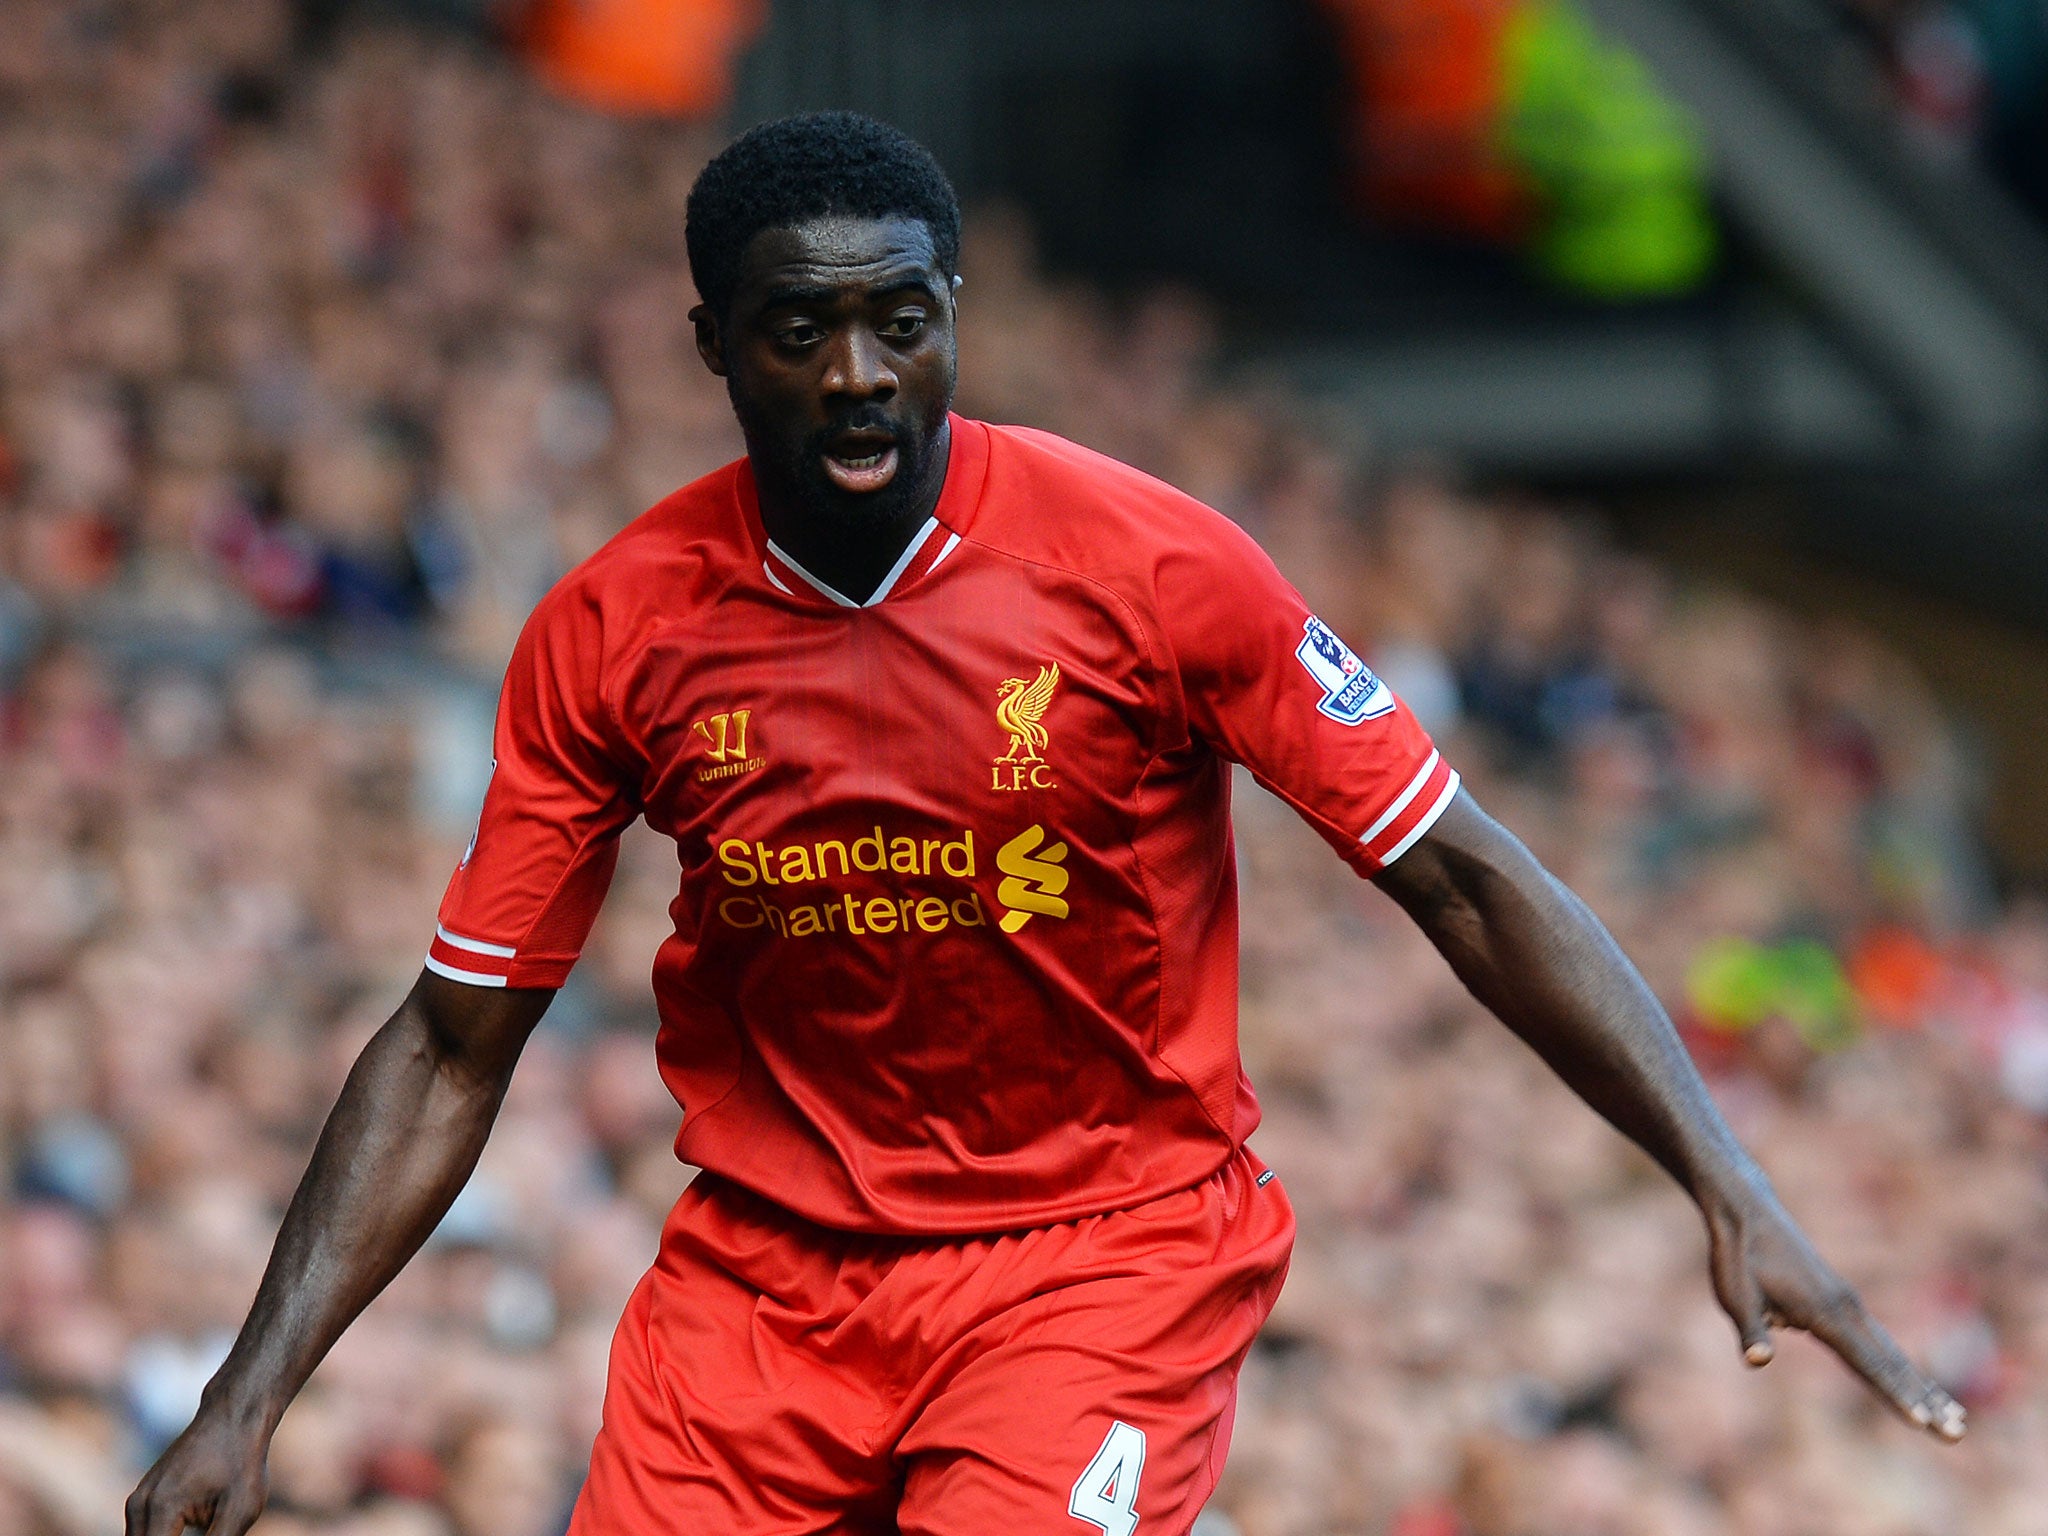 Kolo Toure has claimed Manchester City will be kicking themselves for letting him leave on a free after he joined Liverpool in the summer